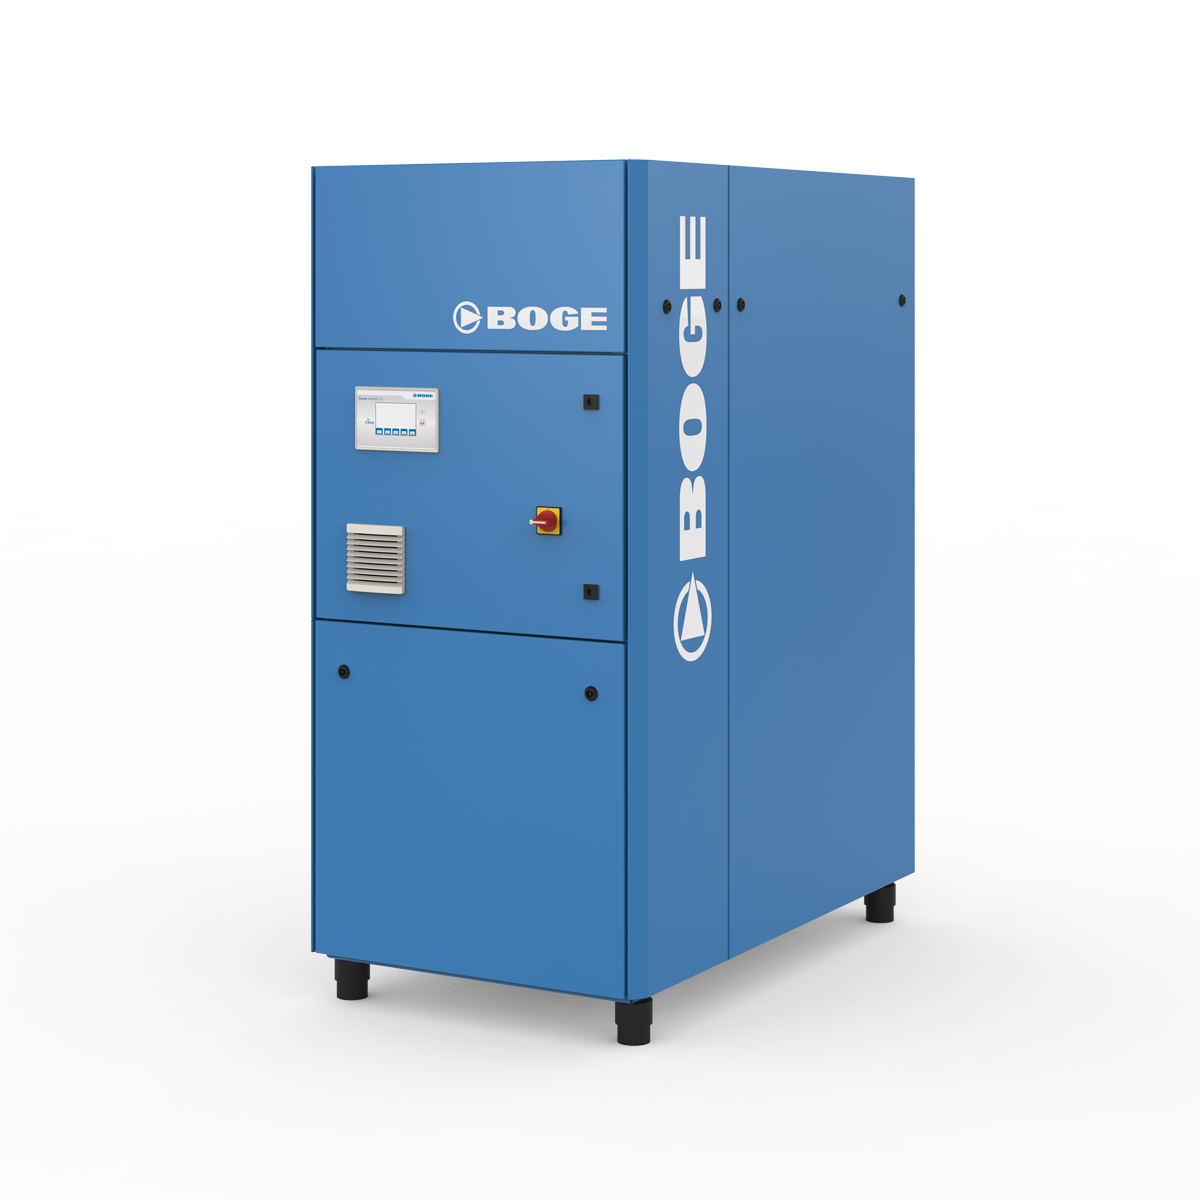 Scroll Compressors EO Series up to 30 kW